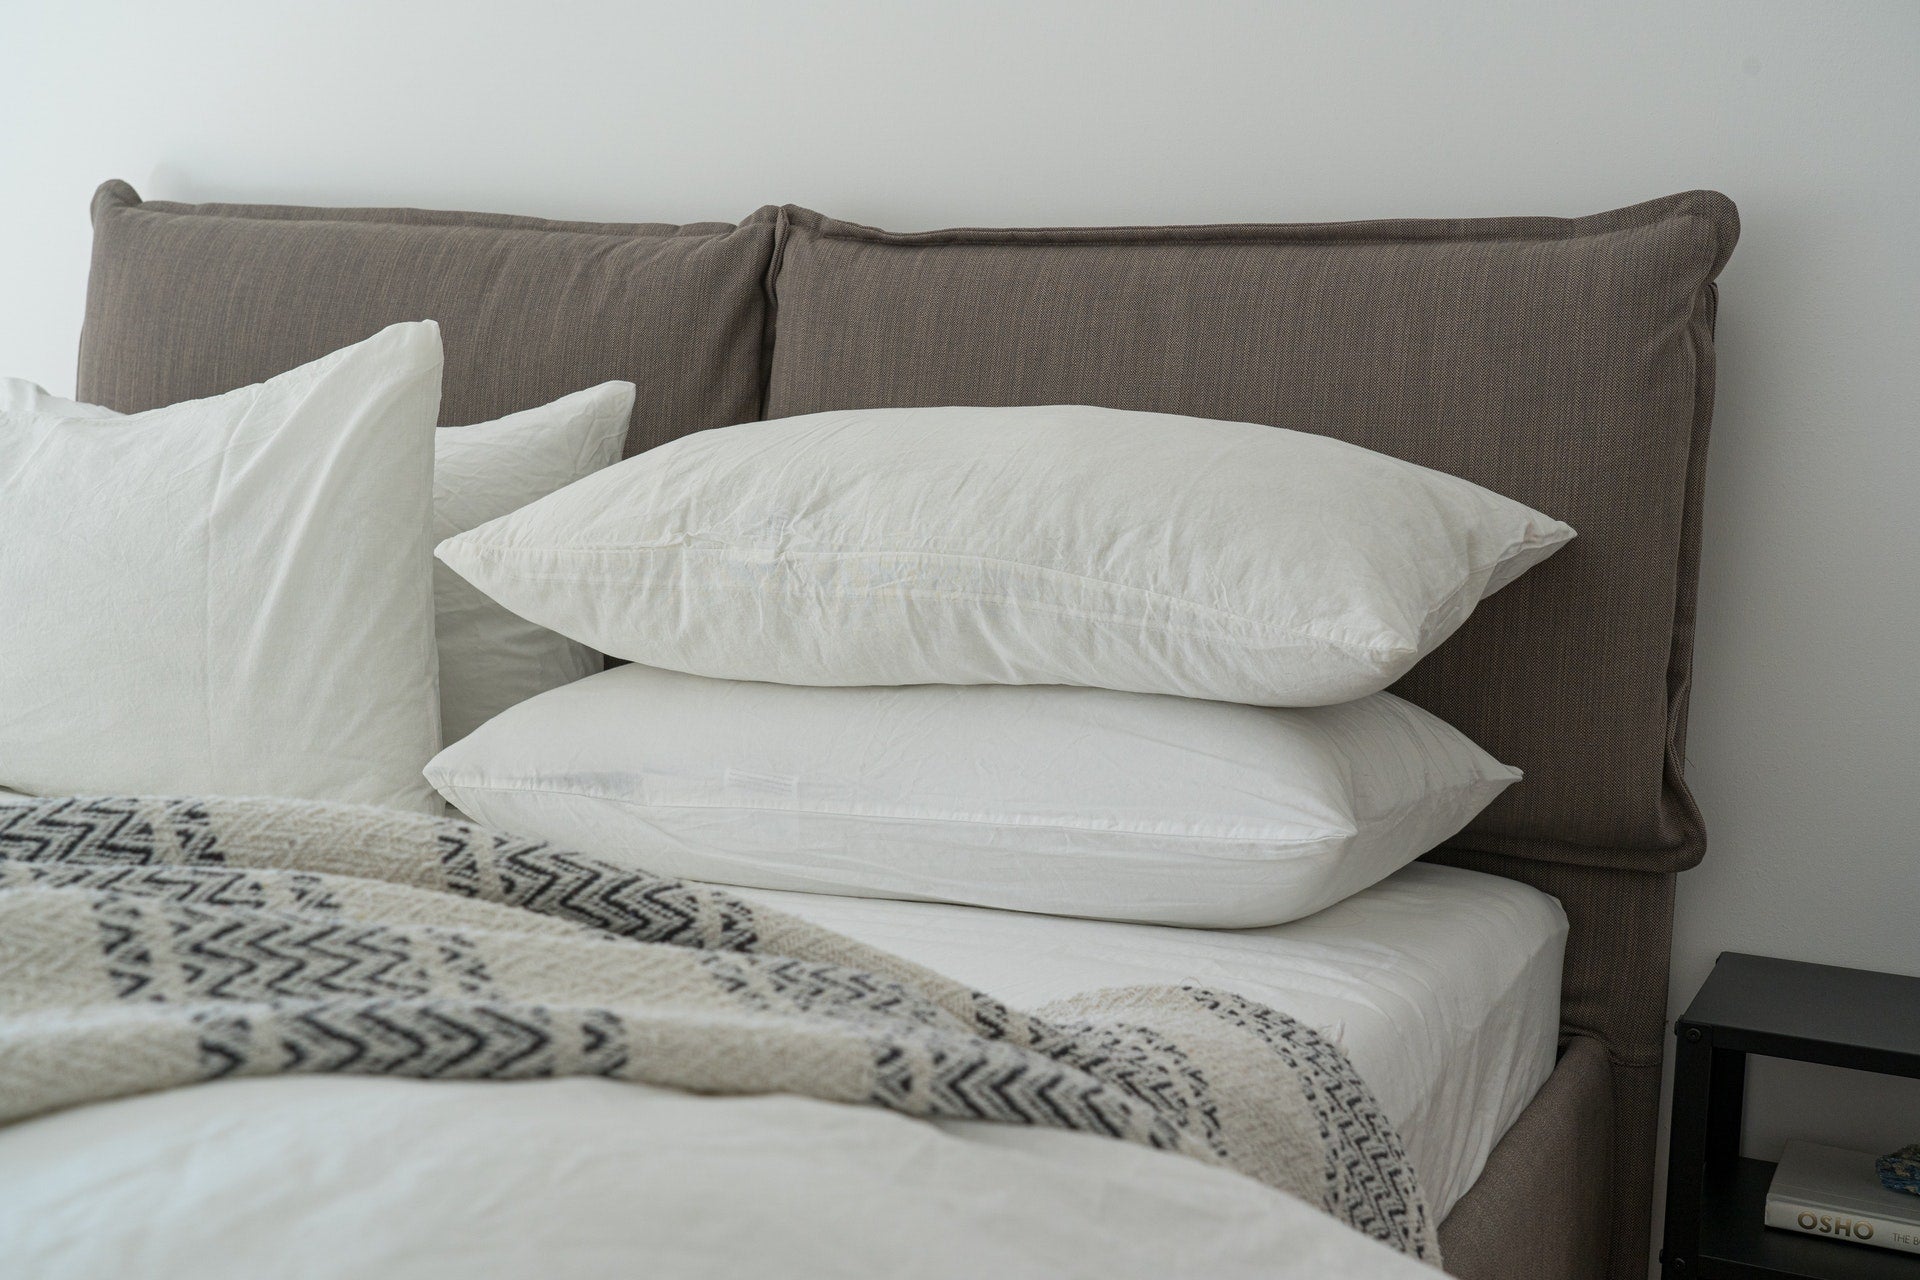 A fully furnished white bed setting with pillows, a duvet, and properly tucked bedsheets